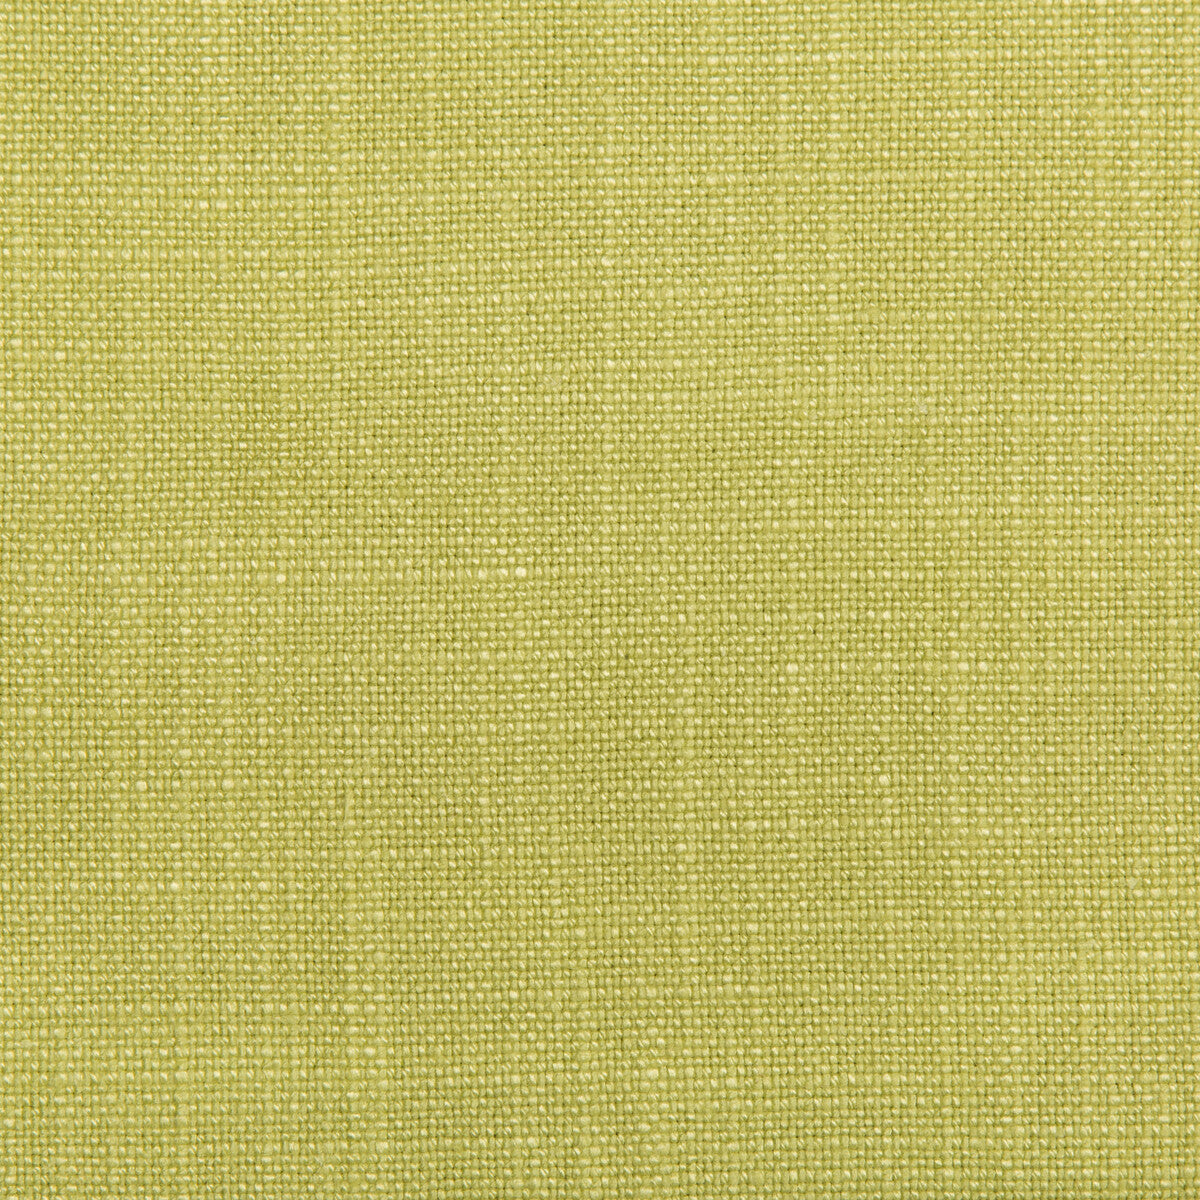 Andelle Plain fabric in kiwi color - pattern 8017158.314.0 - by Brunschwig &amp; Fils